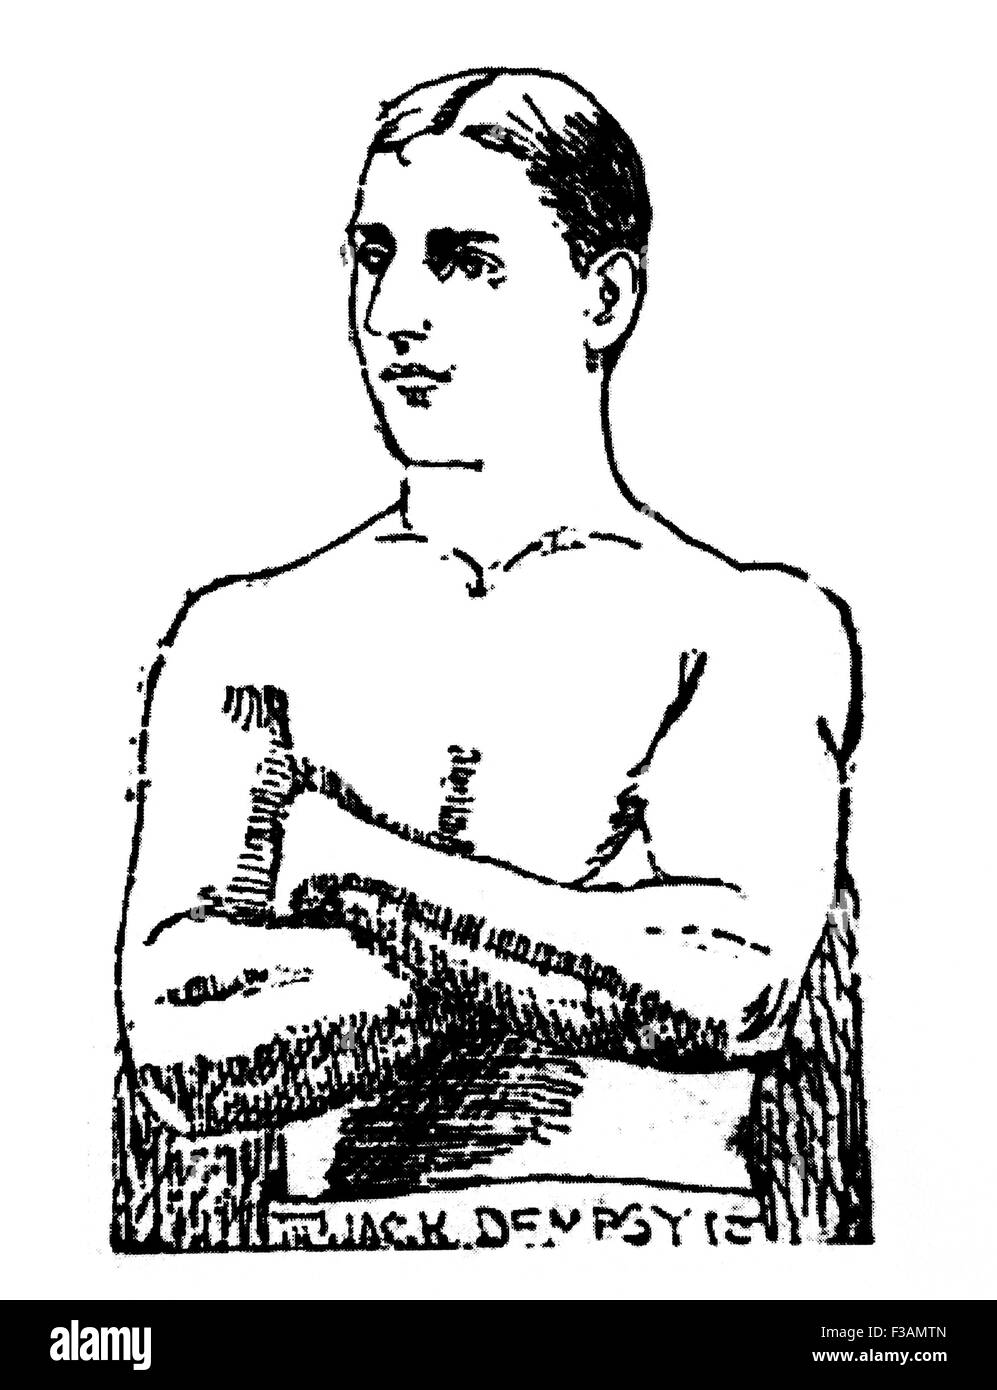 Vintage newspaper portrait of Irish-American boxer 'Nonpareil' Jack Dempsey (1862 - 1895) - often rated as one of the greatest pound for pound fighters in history. Dempsey (real name John Edward Kelly) arrived in New York from Ireland as a child and worked in a barrel factory before turning his hand to wrestling and boxing in 1883. He rose to become American and World Middleweight Champion and his reputation for being unbeatable earned him the nickname 'Nonpareil' as he was considered to be without equal. Stock Photo